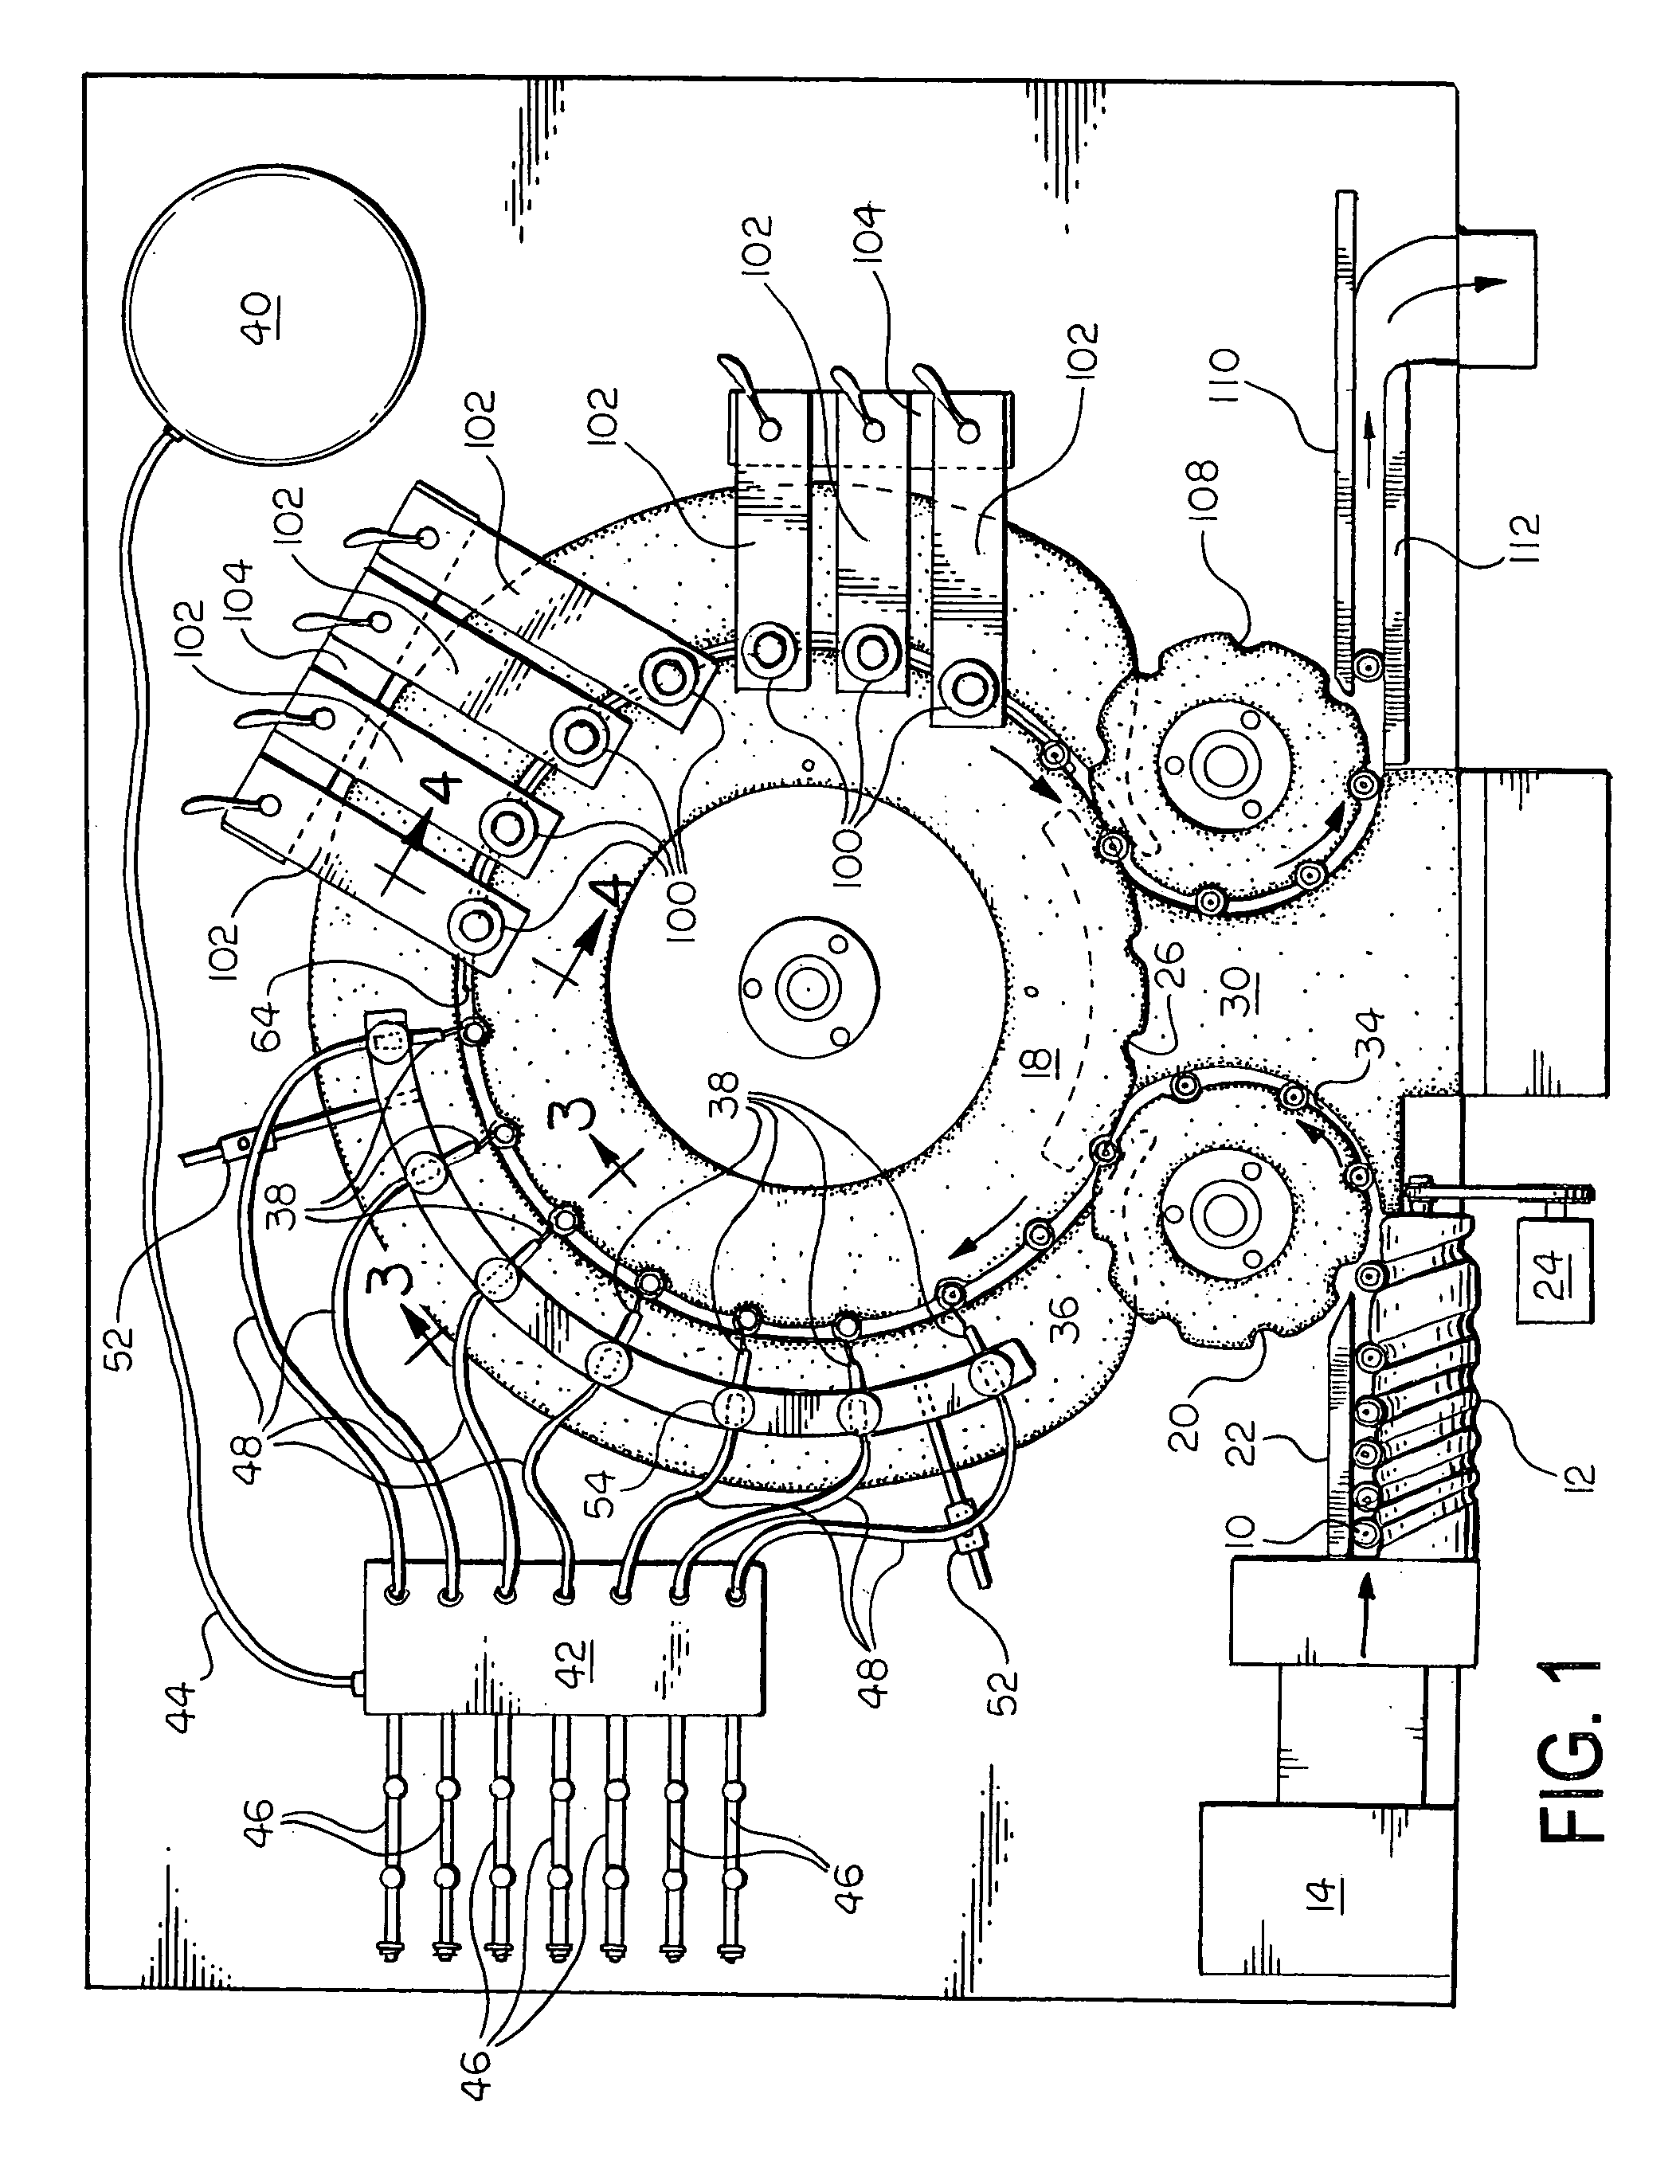 System for filling and closing fluid containing cartridges